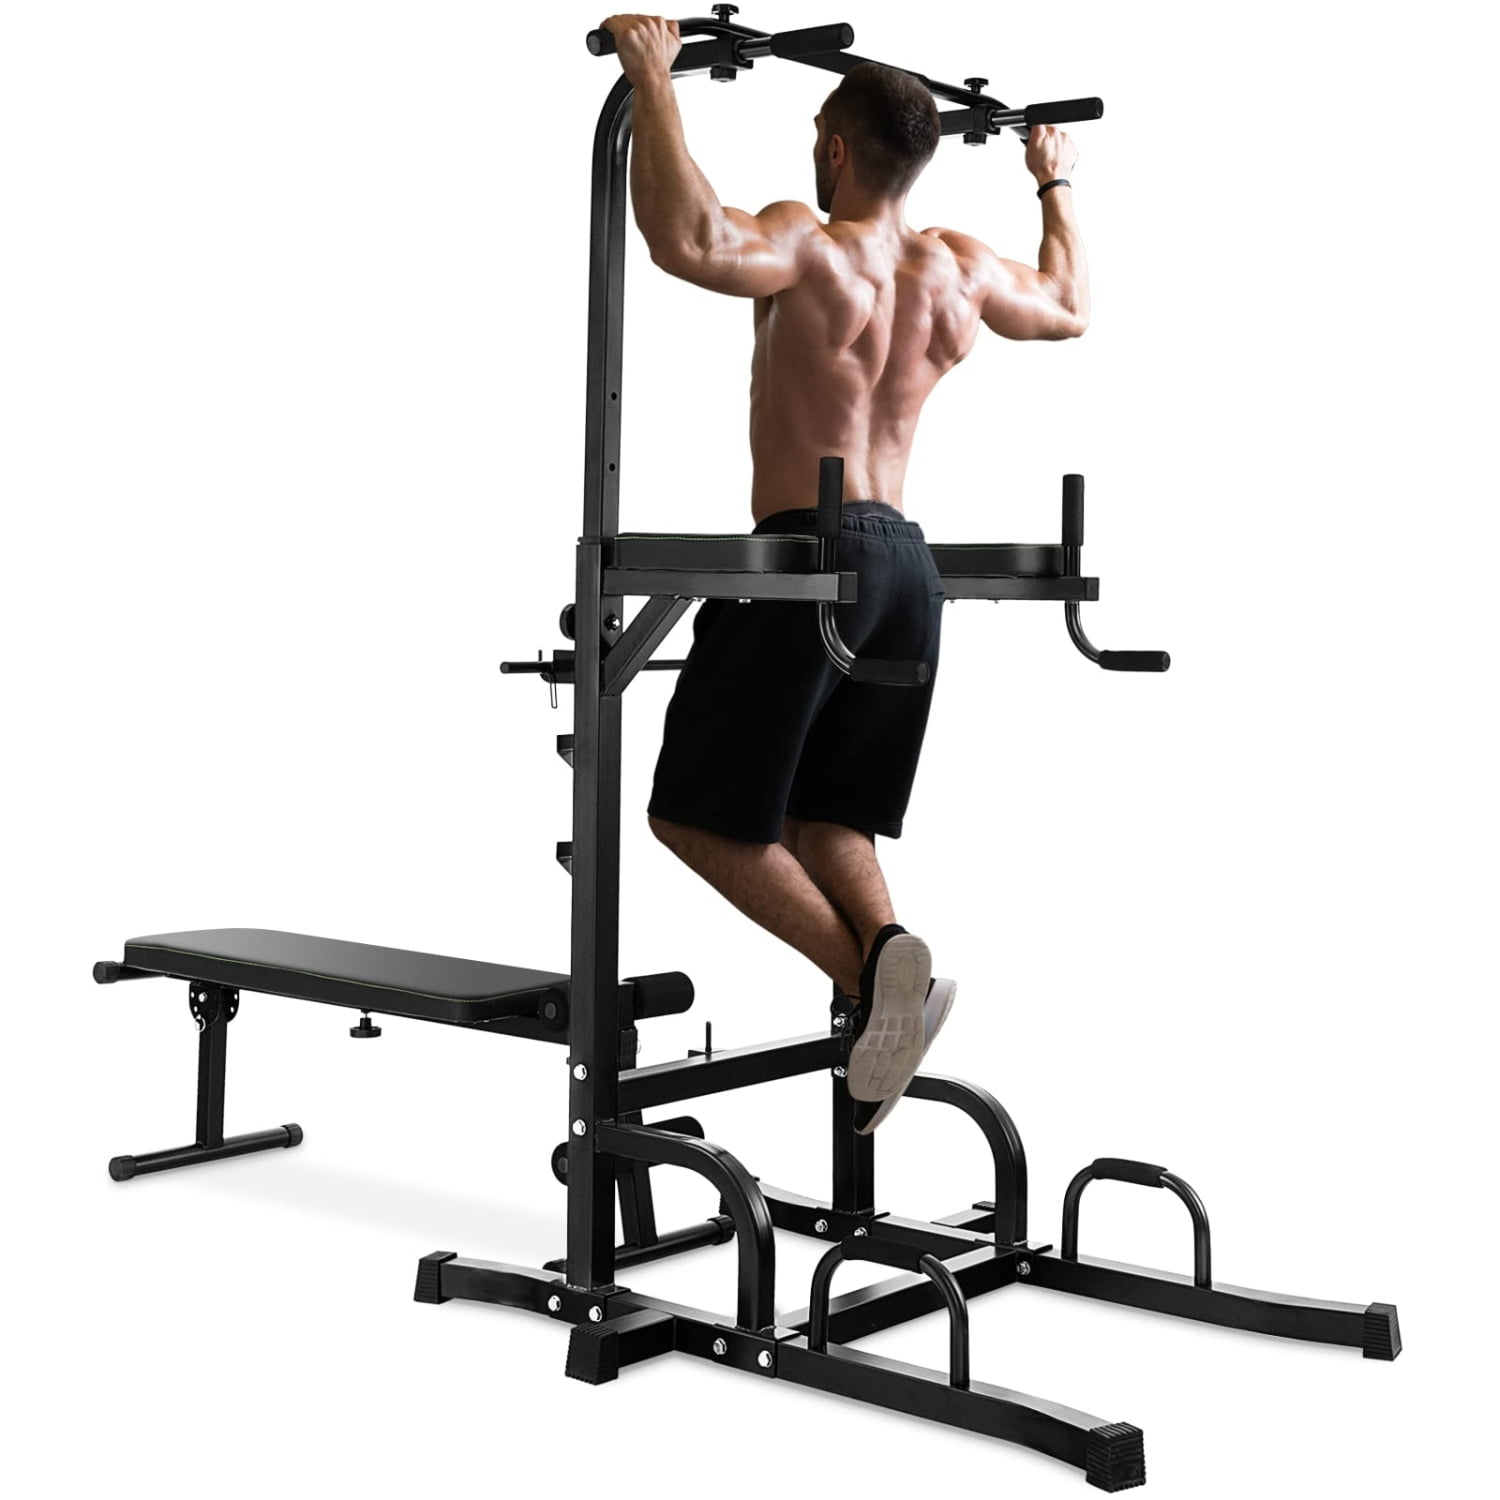 Power Tower Dip Station Pull Up Bar - Multi-Purpose Home Gym Equipment with  Adjustable Height and Non-Slip Foot Pads - 330lbs Capacity